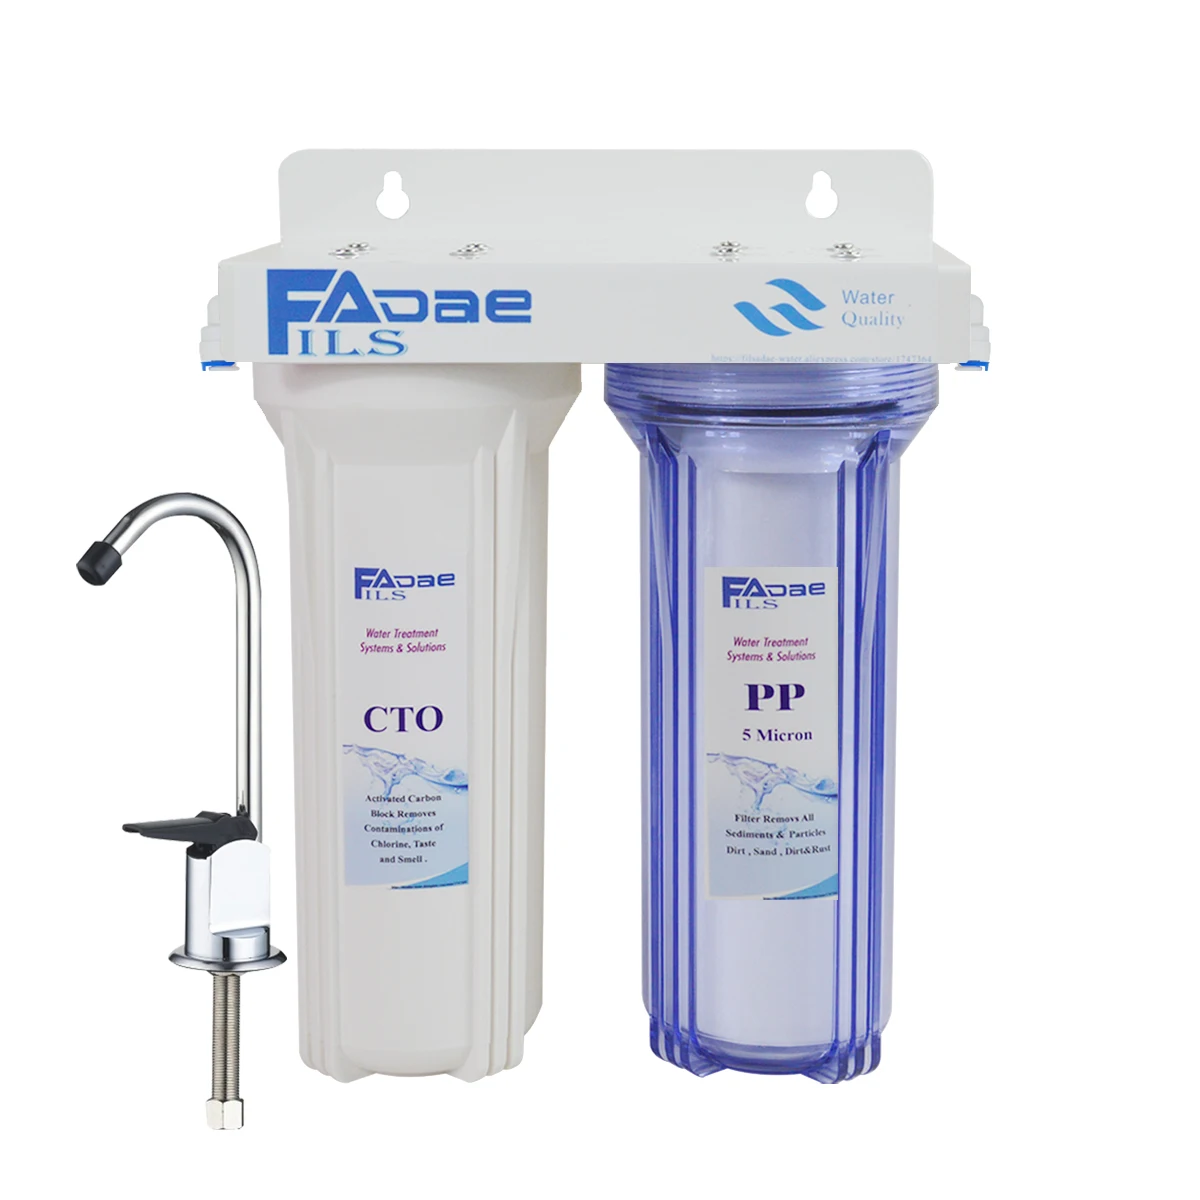 Two Stage Household Water Filtration S25ystem include filters - PP Sedimment and CTO Carbon Block Filter